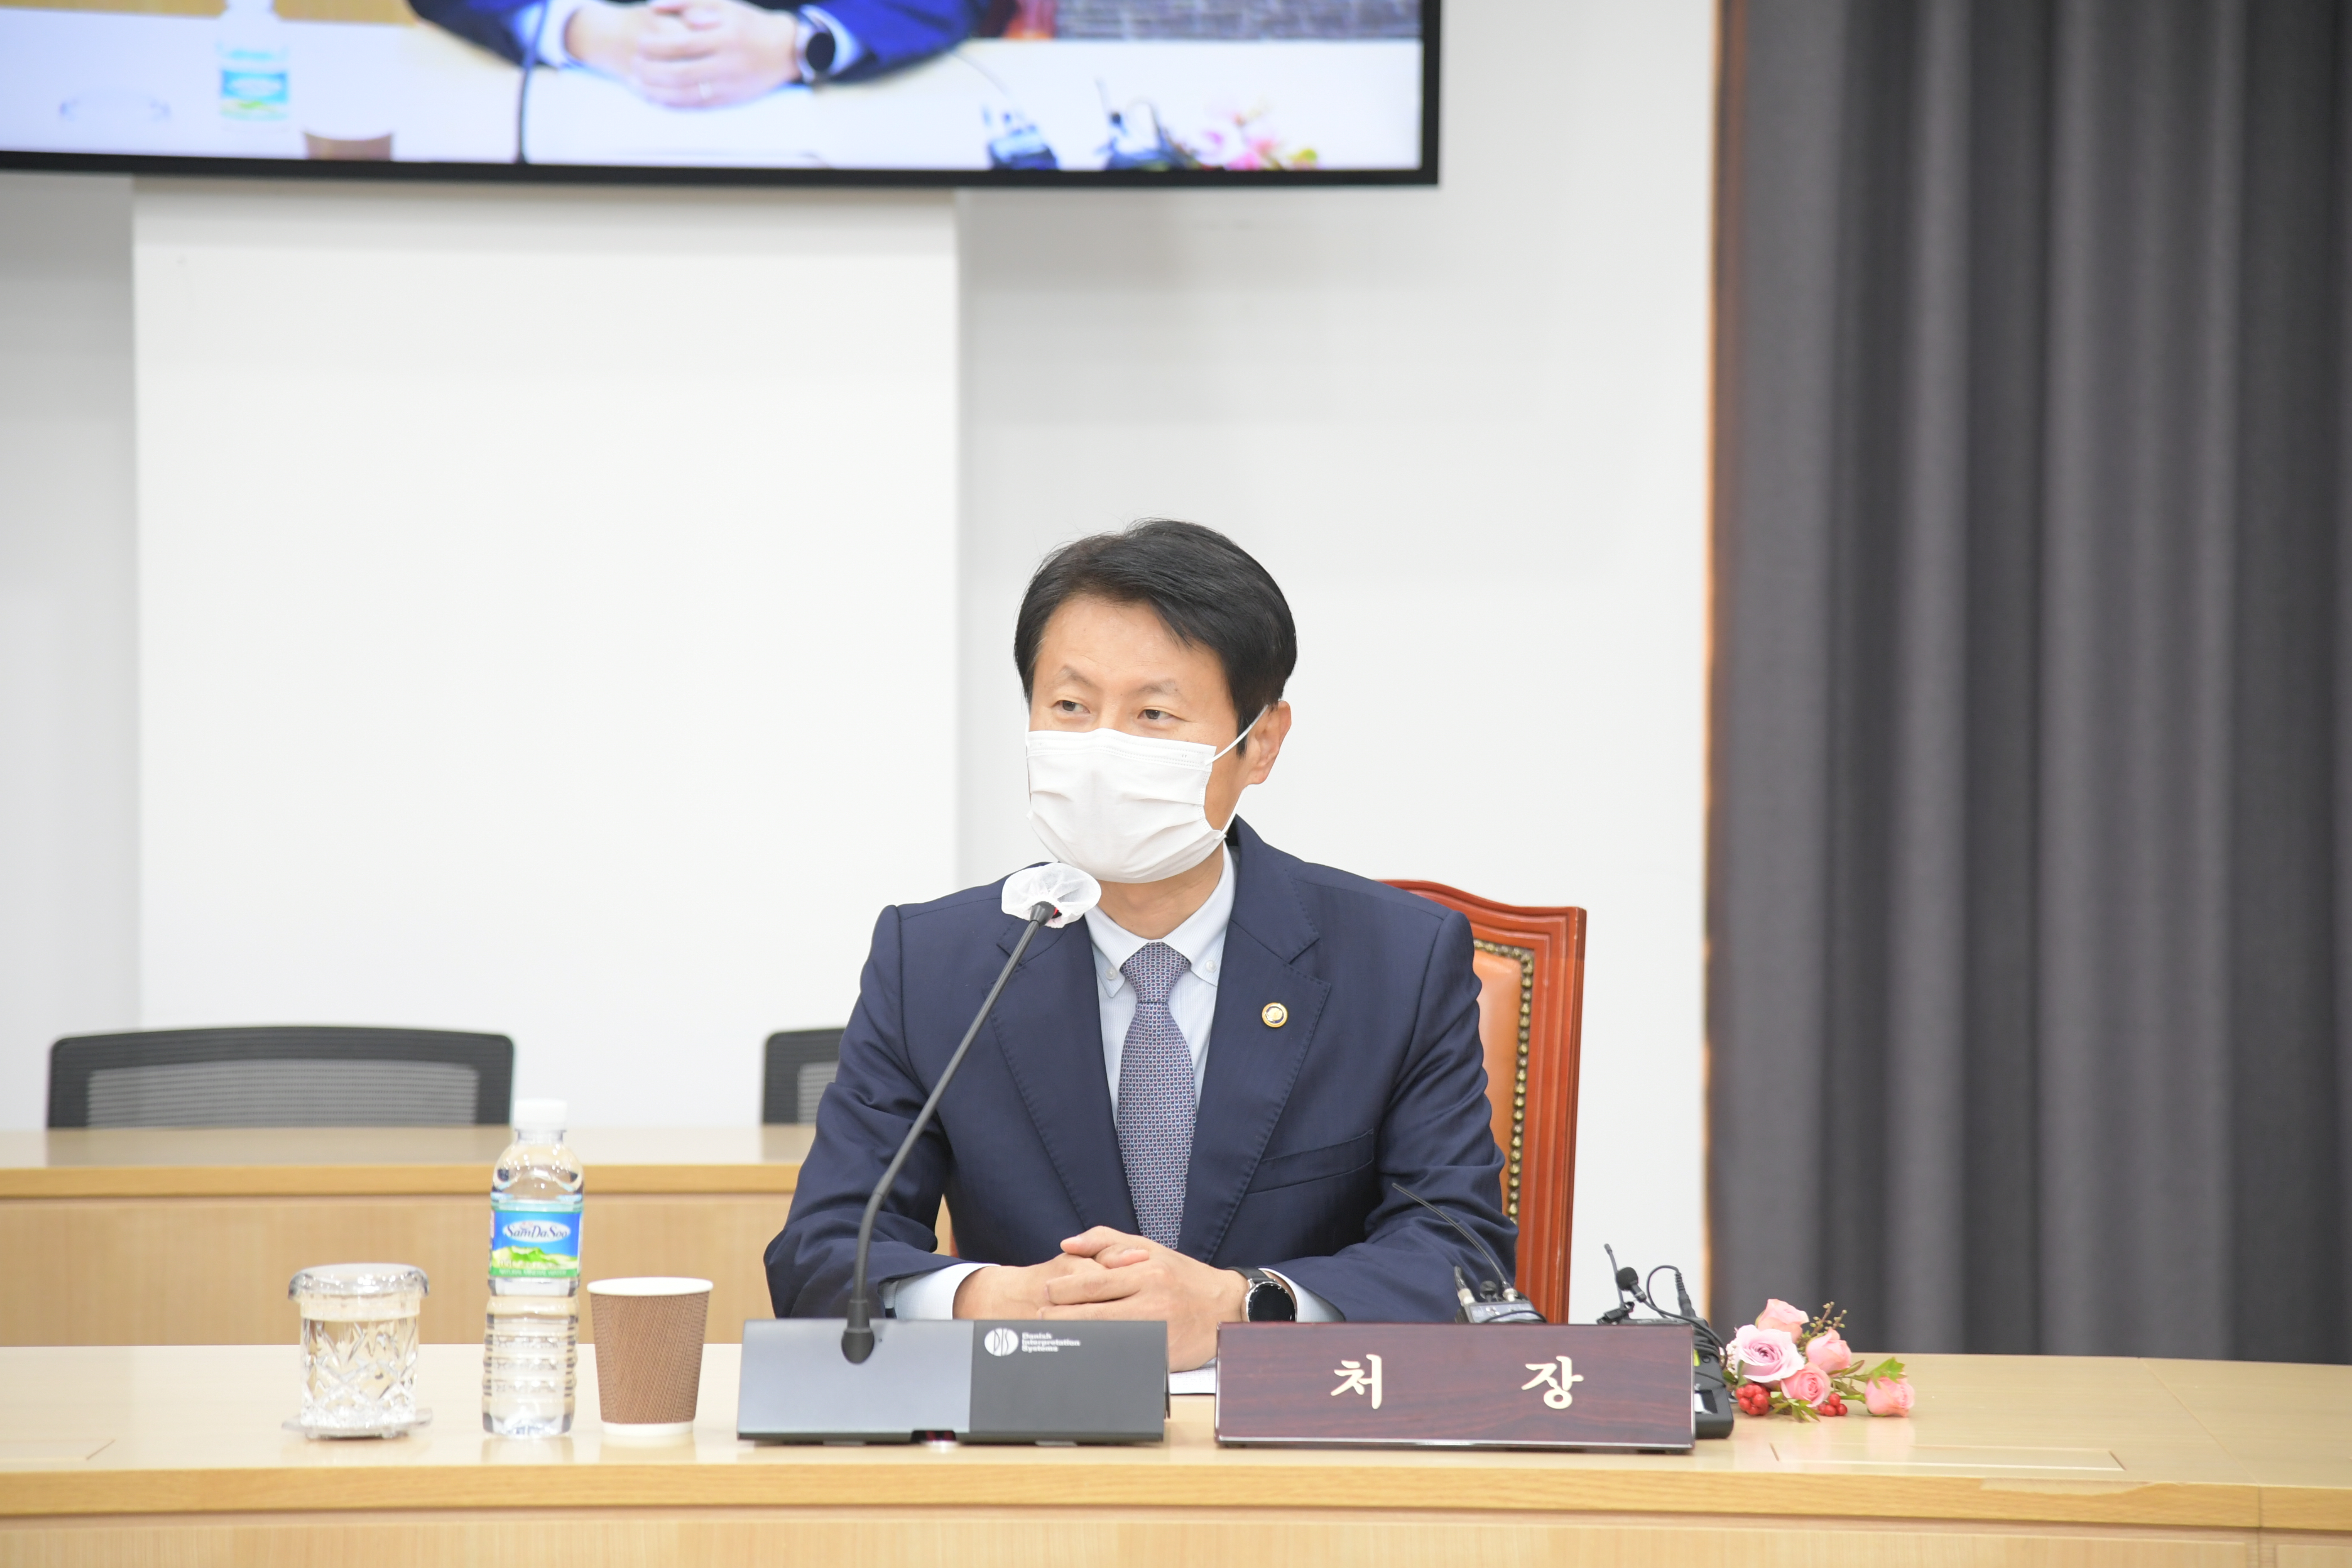 Photo News3 - [Nov. 2, 2020] Inauguration of Minister Kim Ganglip as the 6th Minister of Food and Drug Safety